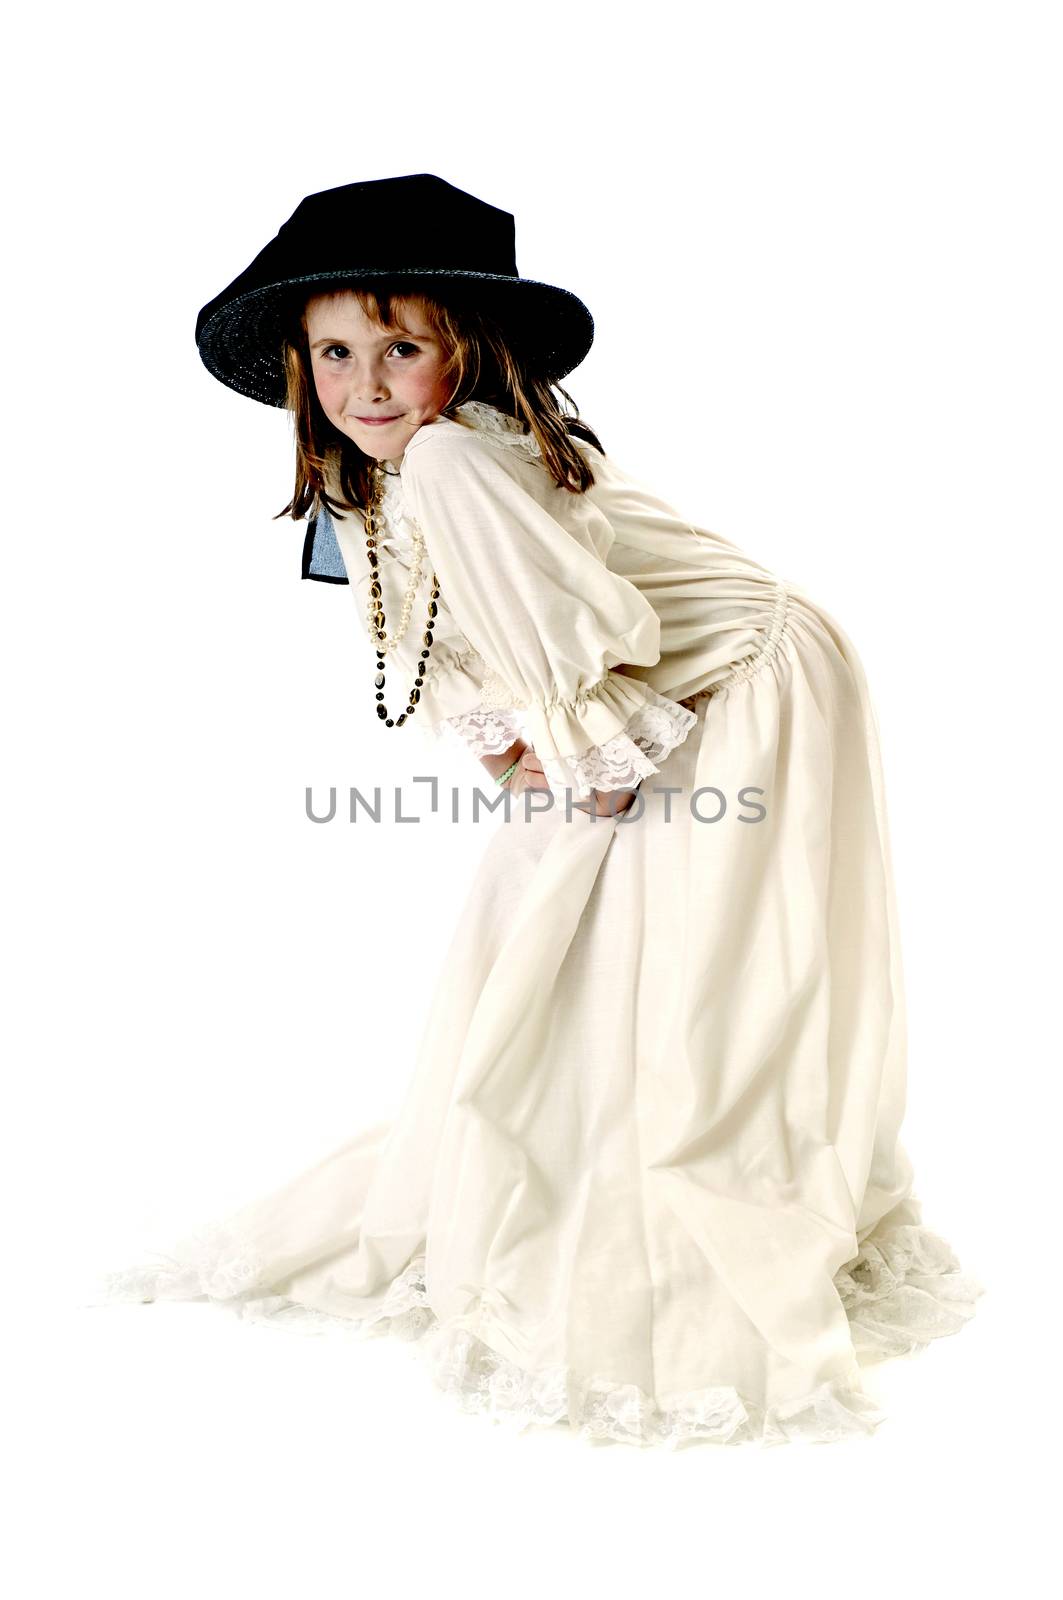 Little girl playing dress-up in her grandmothers clothes.